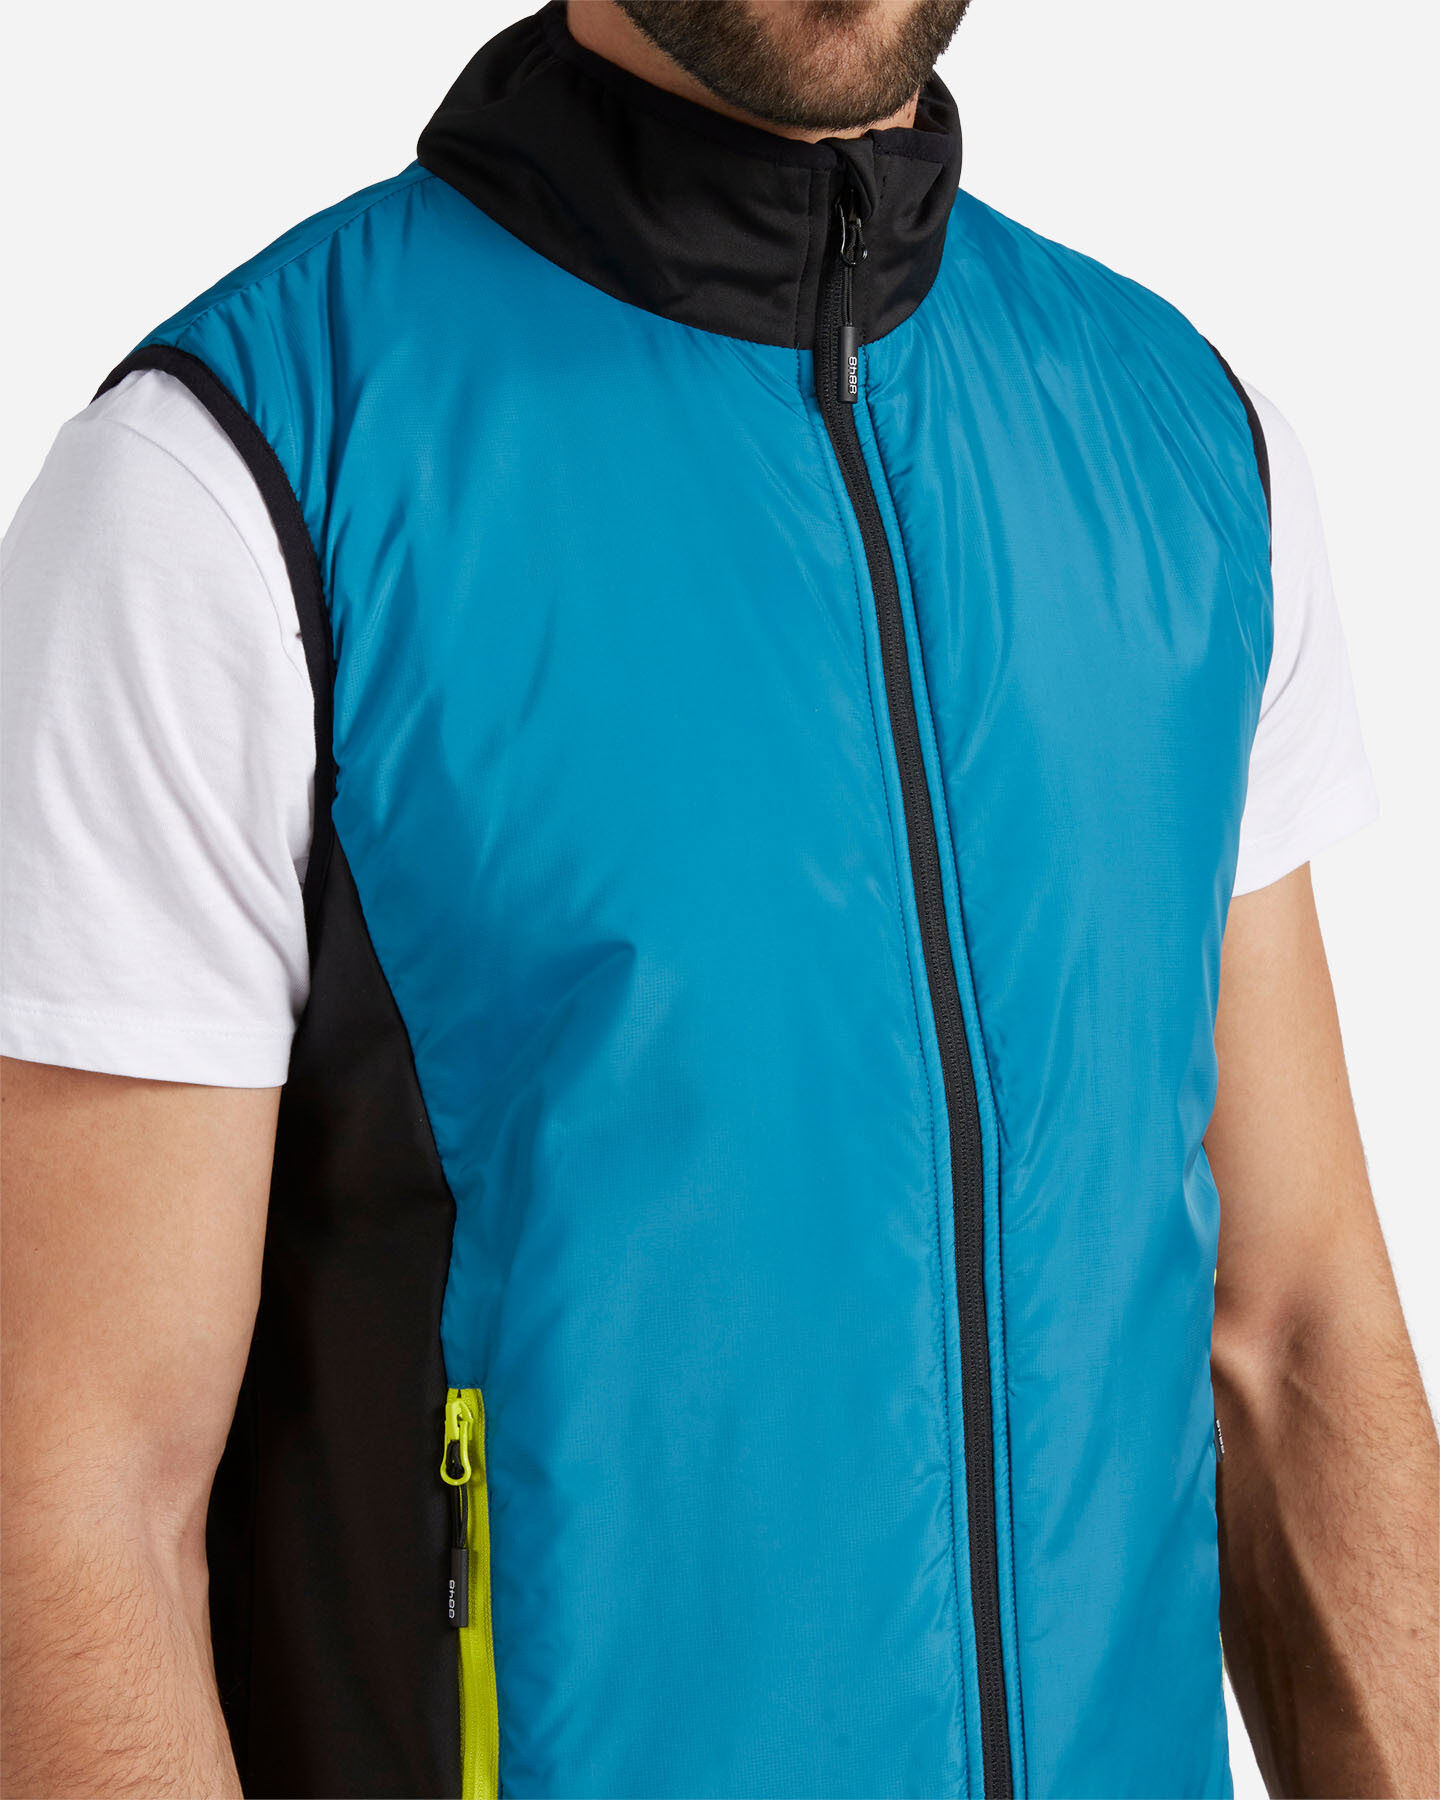  Gilet 8848 MOUNTAIN HIKE M S4130909|1167/050|S scatto 4